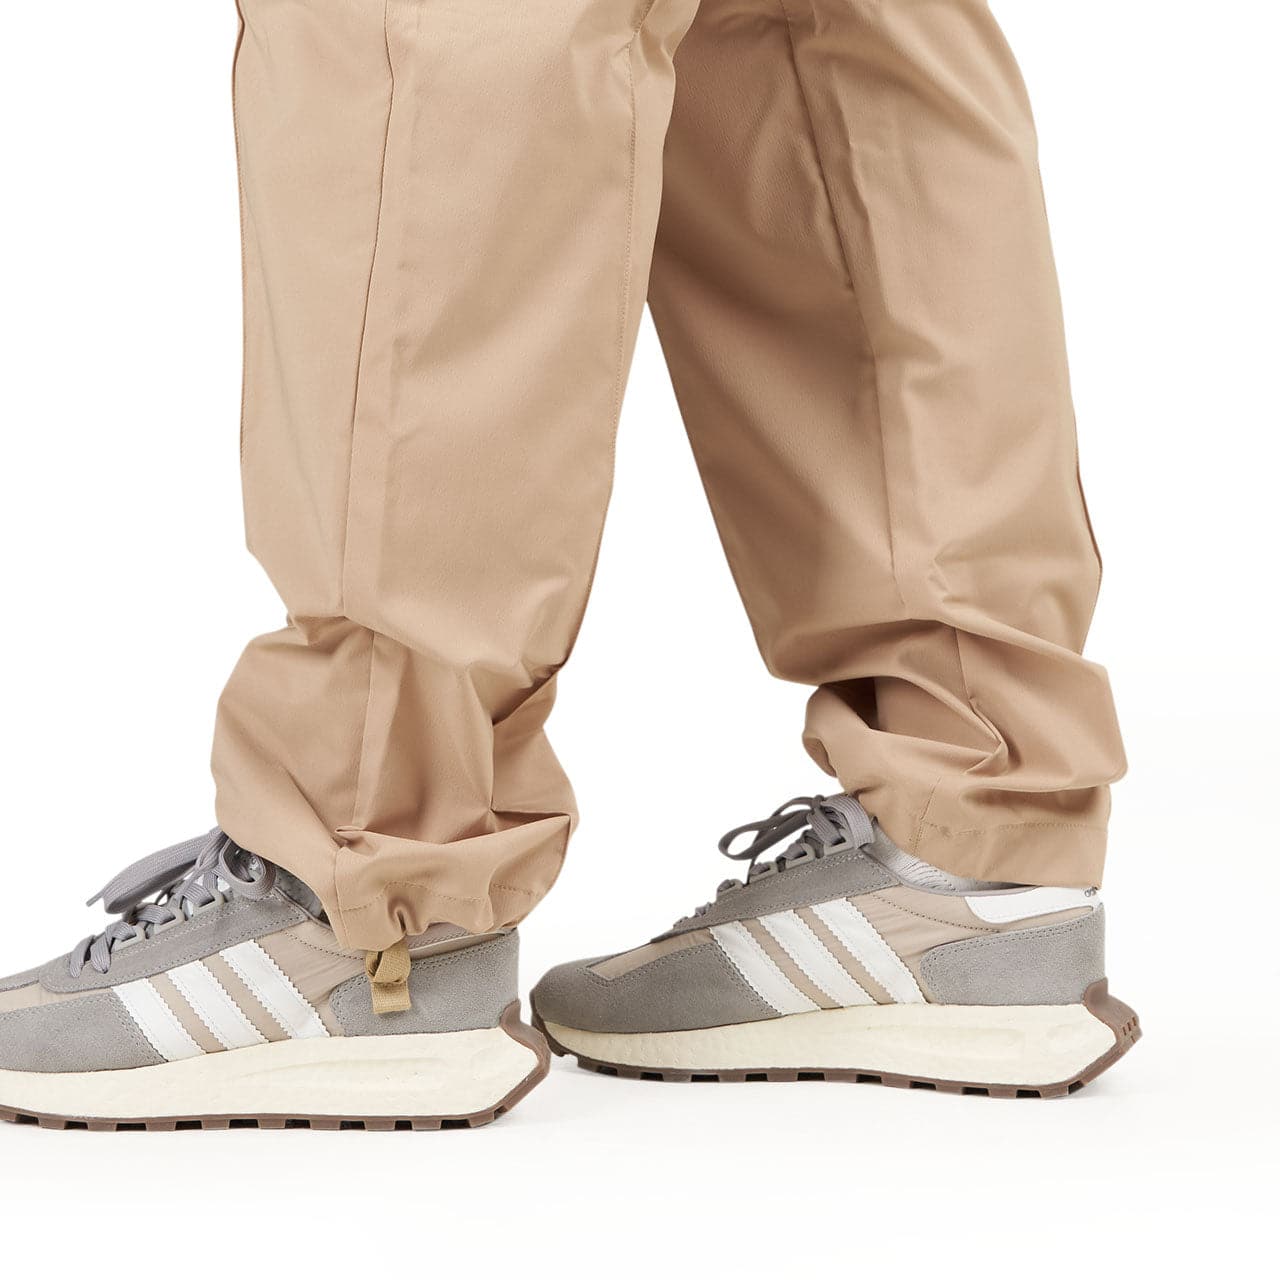 Adidas x Parley BOILERSUIT (Sand)  - Allike Store